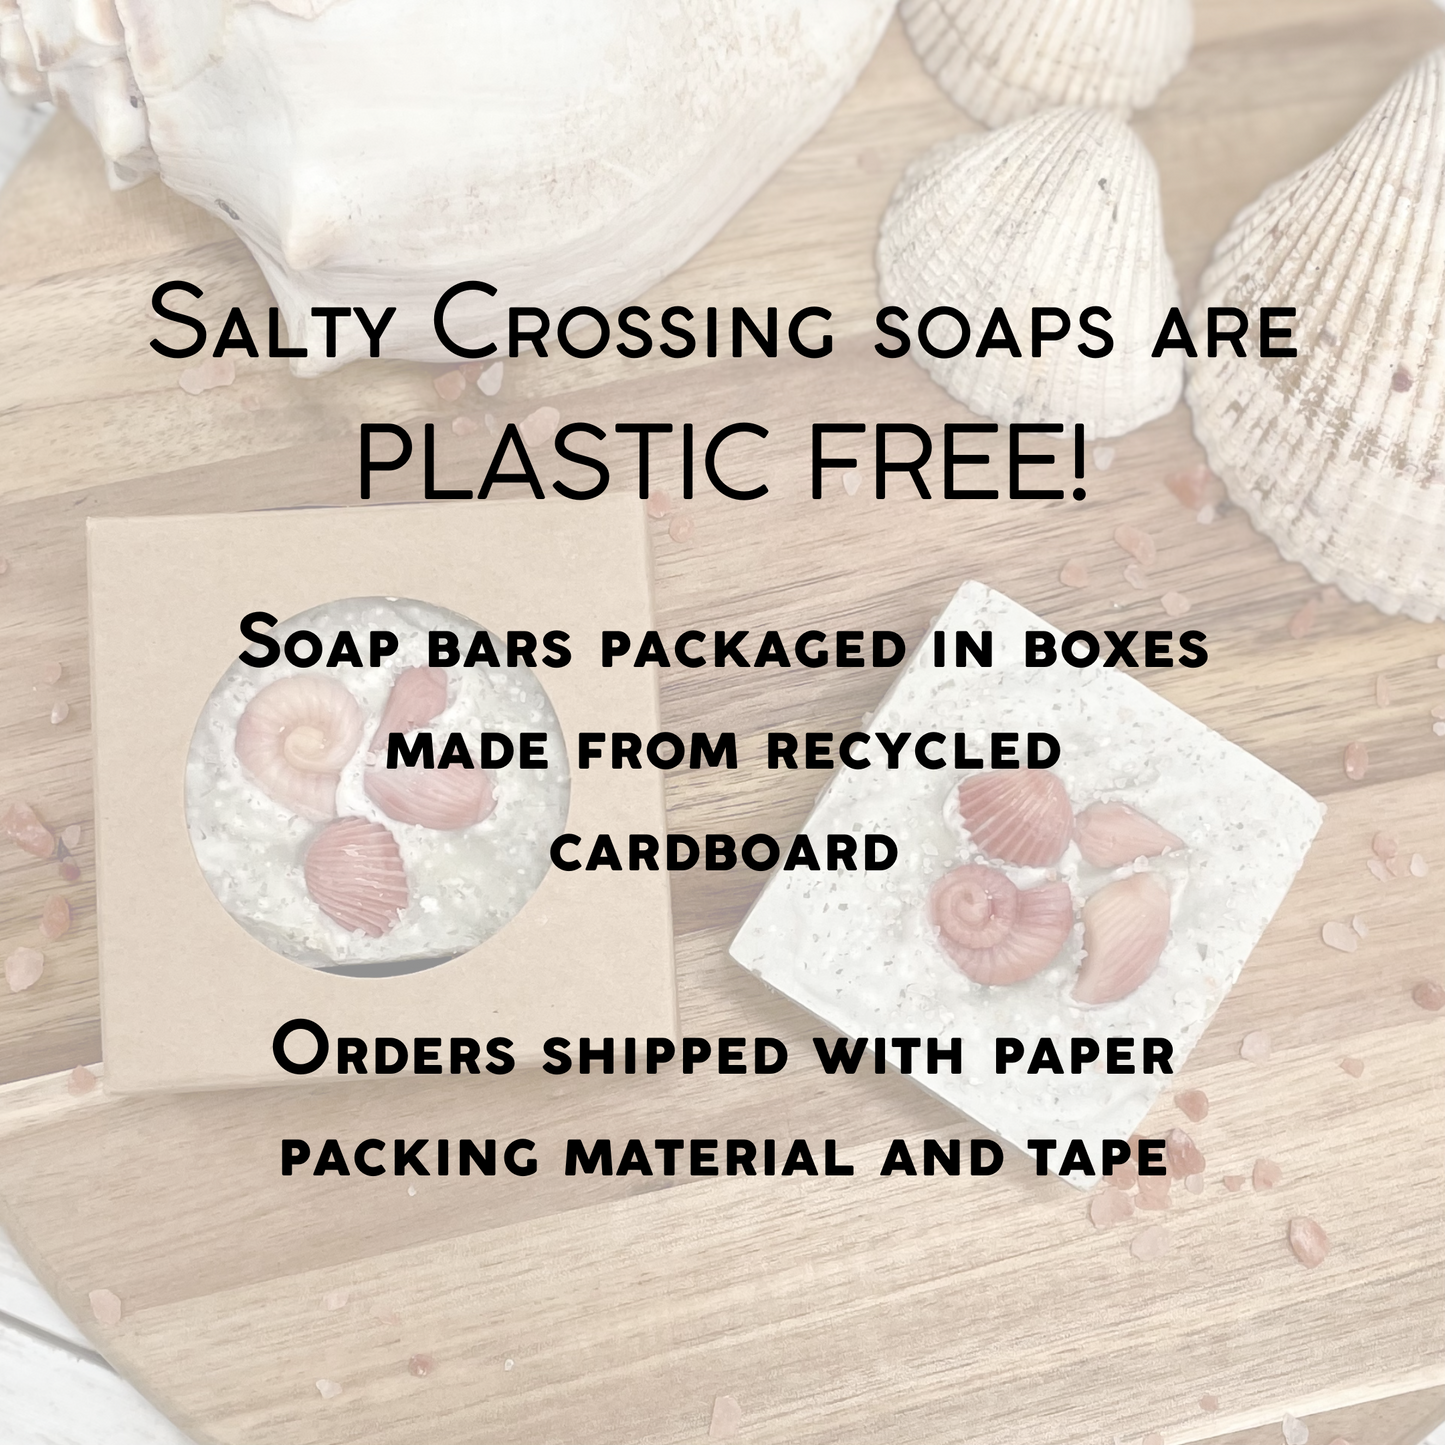 graphic. salty crossing soaps are plastic free. soap bars packaged in boxes made from recycled cardboard. orders shipped with paper packing material and tape.